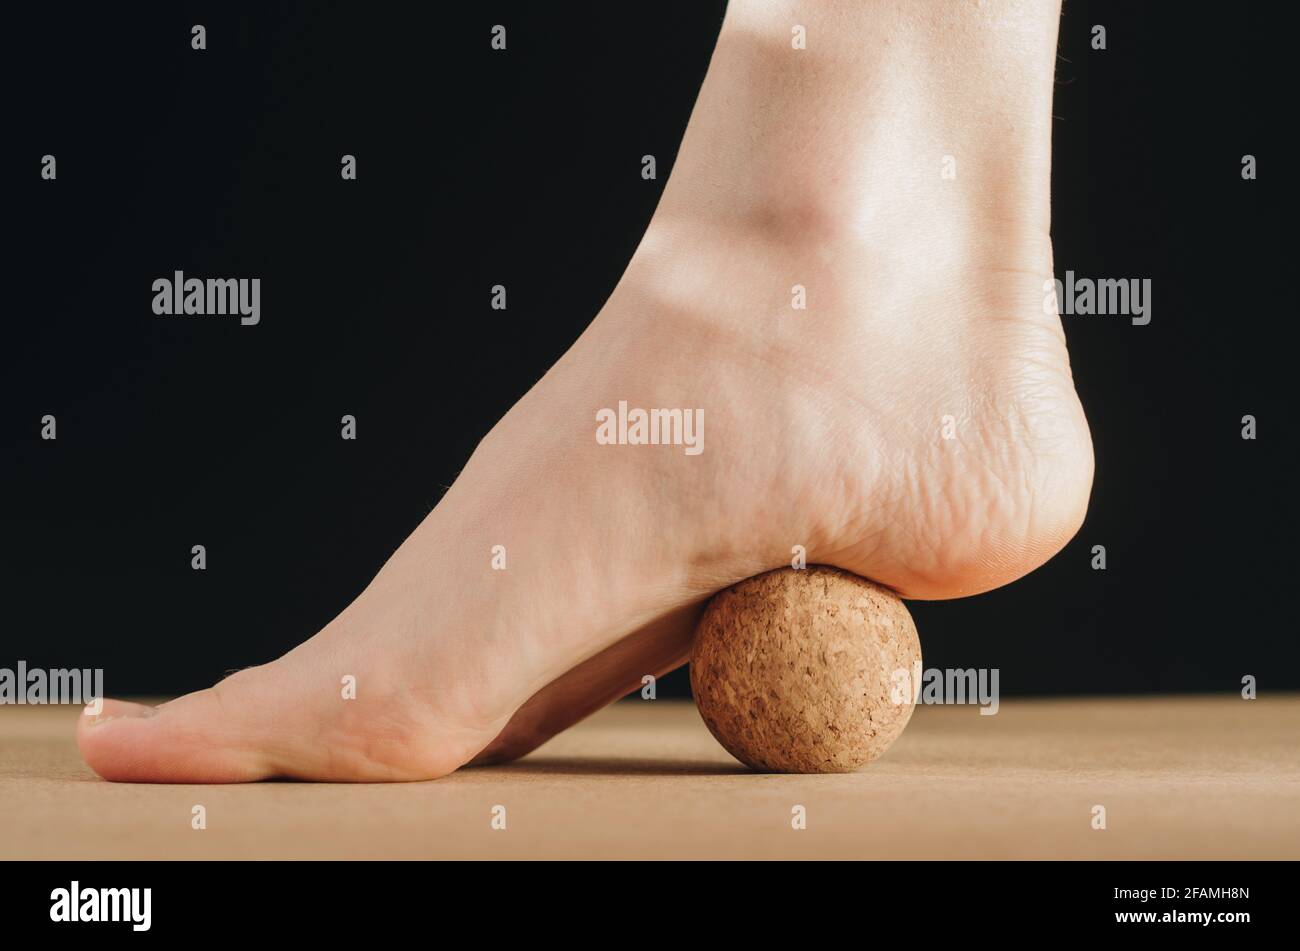 Artistic isolated close up video of foot on cork massage ball on cork yoga block for plantar fascia massage and hydration on black background Stock Photo